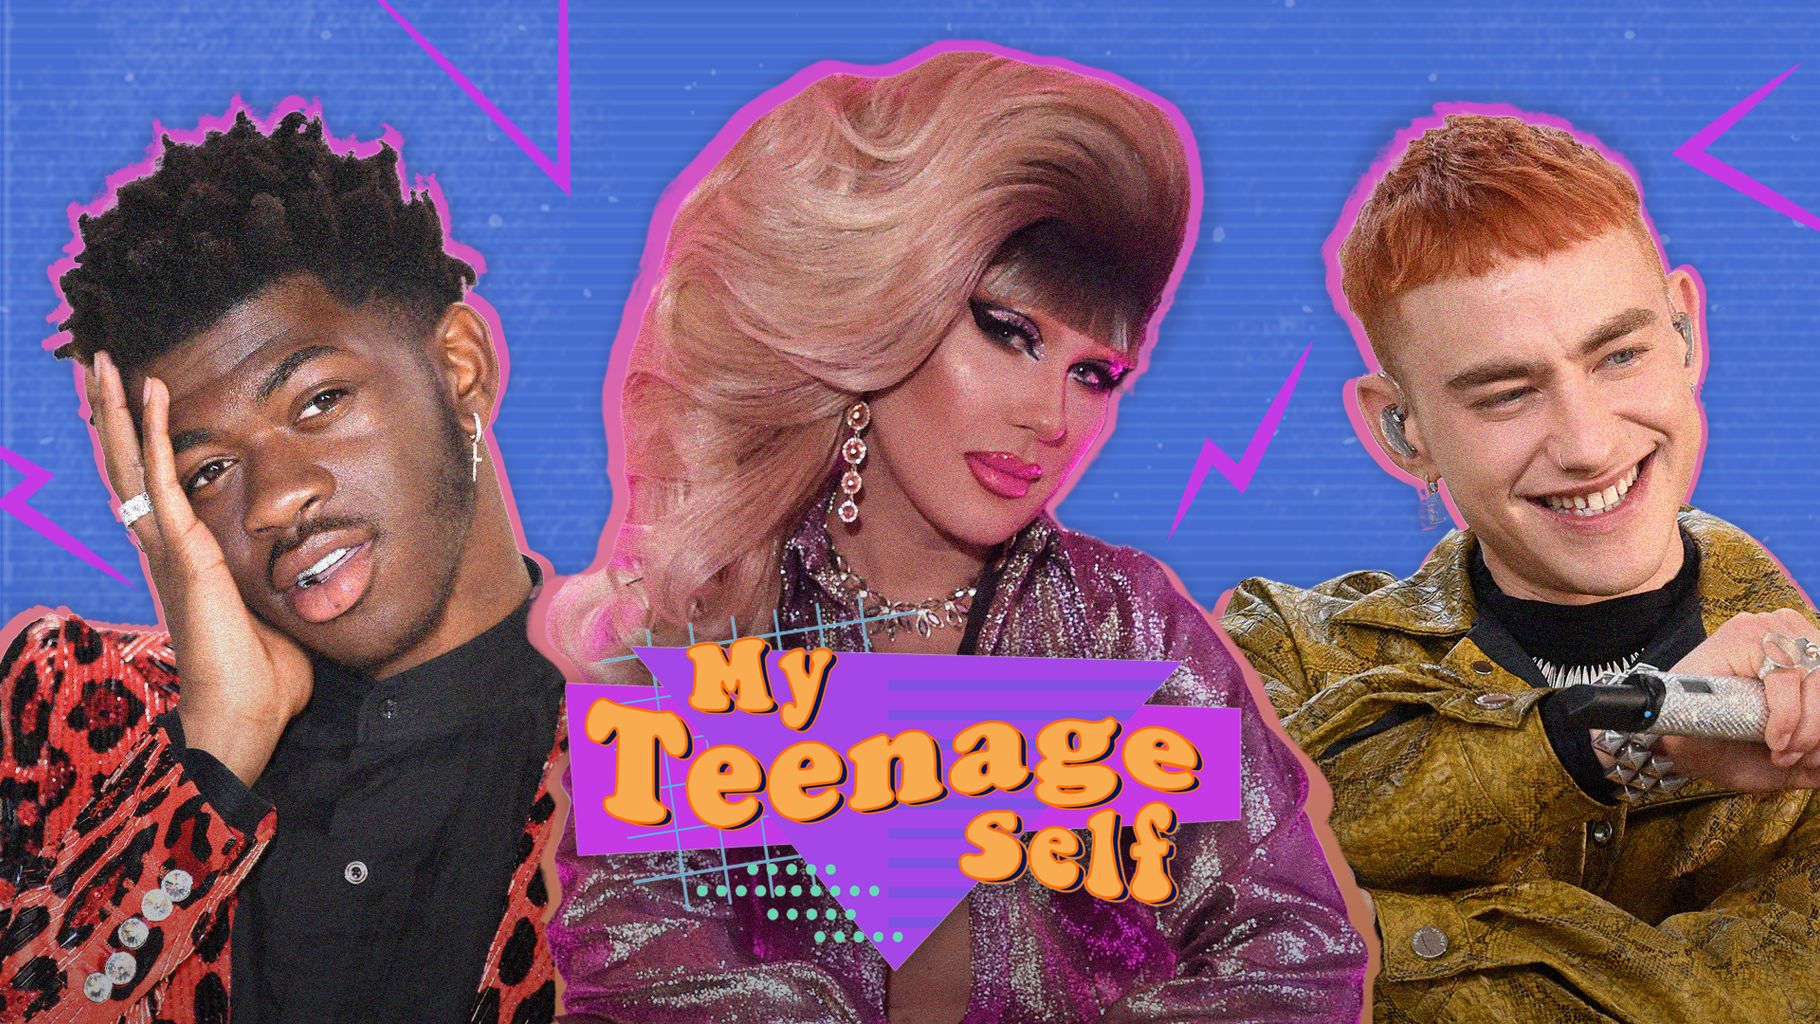 Lil Candy Teen - My Teenage Self: Queer Edition